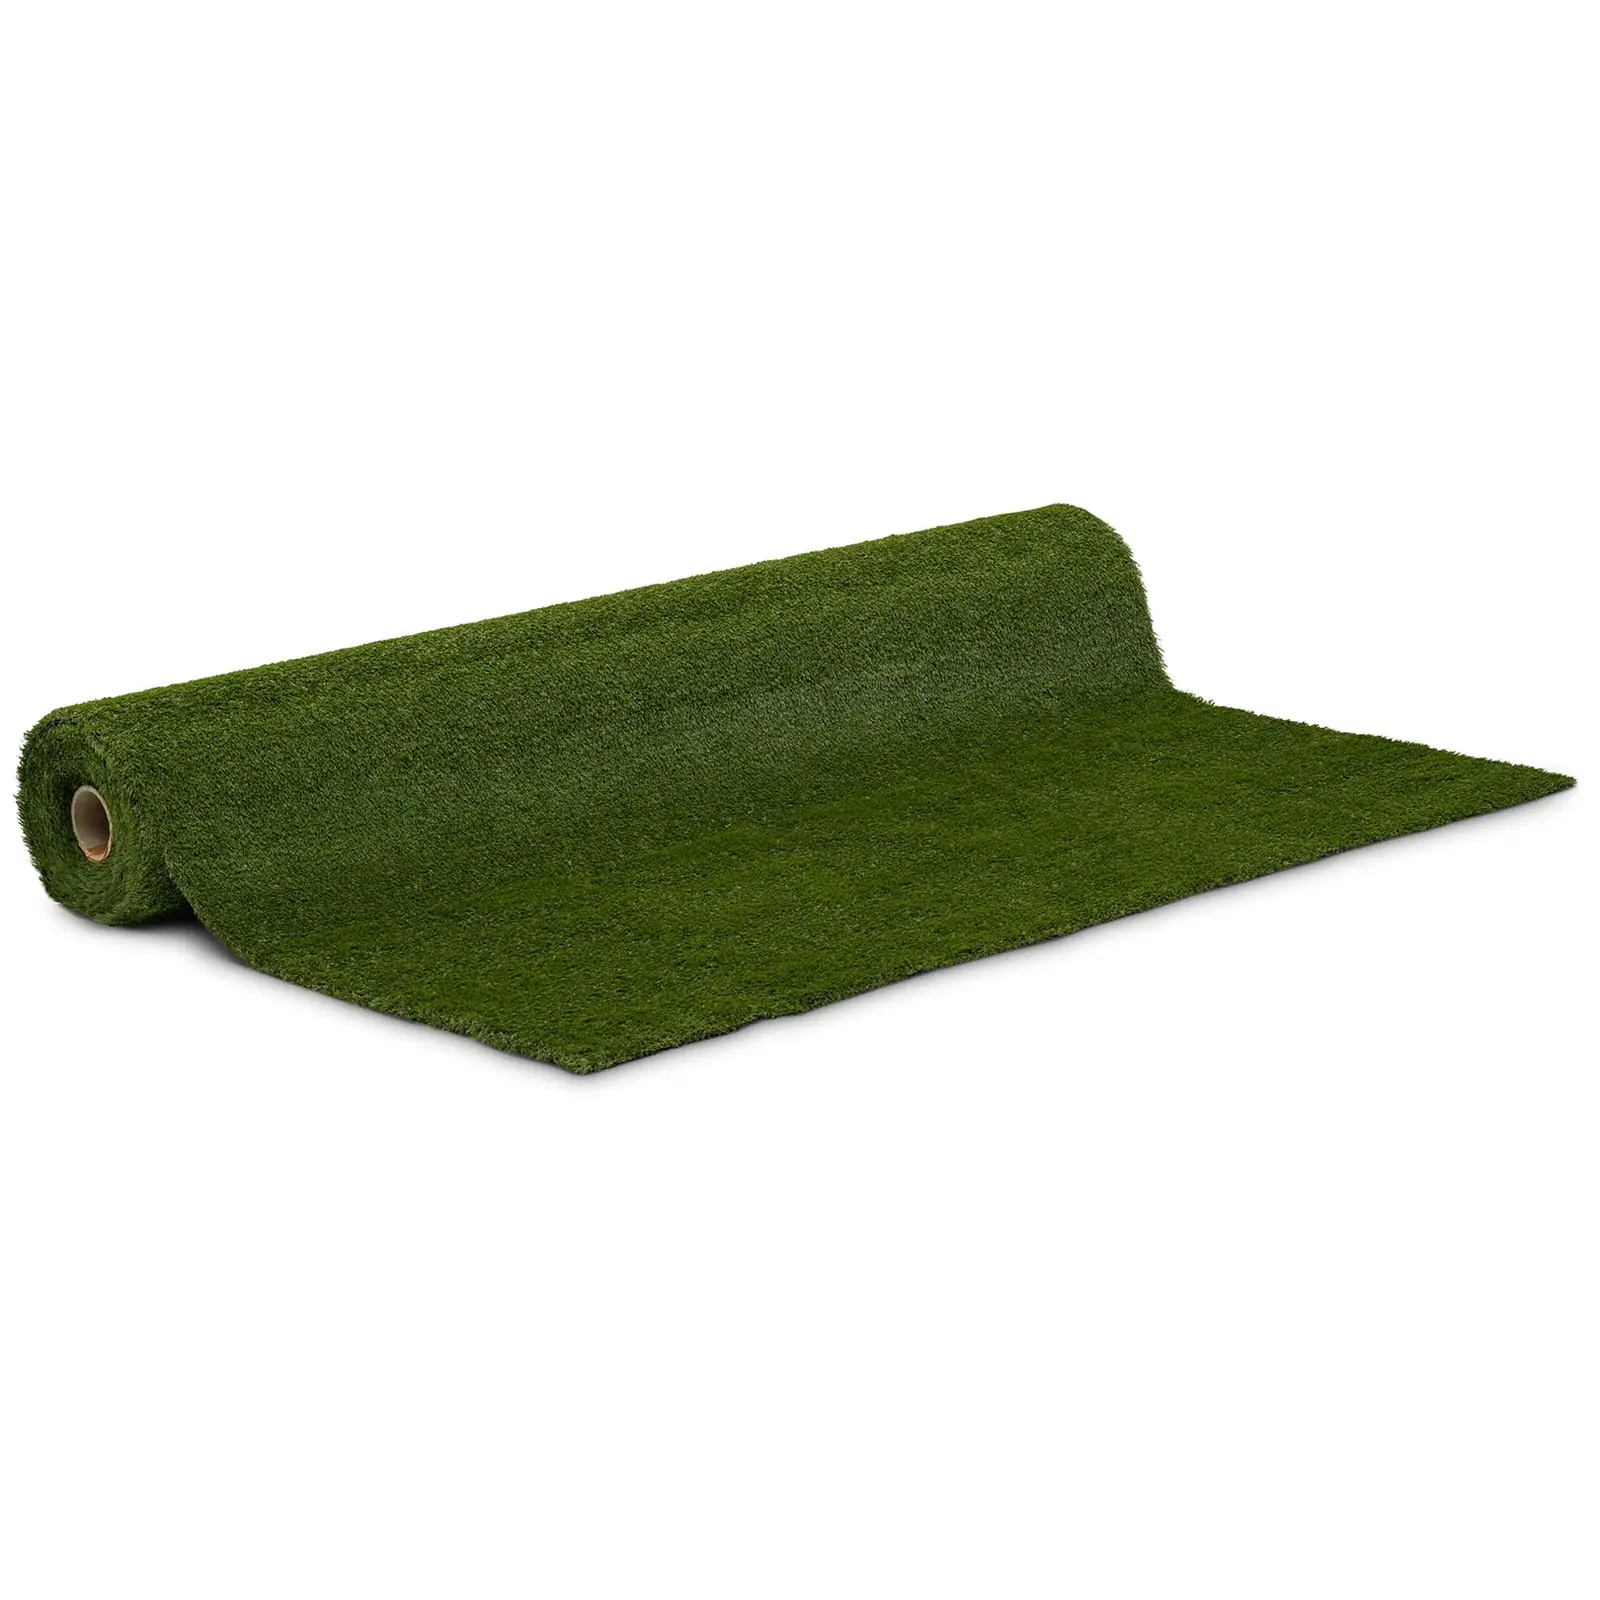 Artificial grass - 200 x 1000 cm - Height: 30 mm - Stitch rate: 20/10 cm - UV-resistant